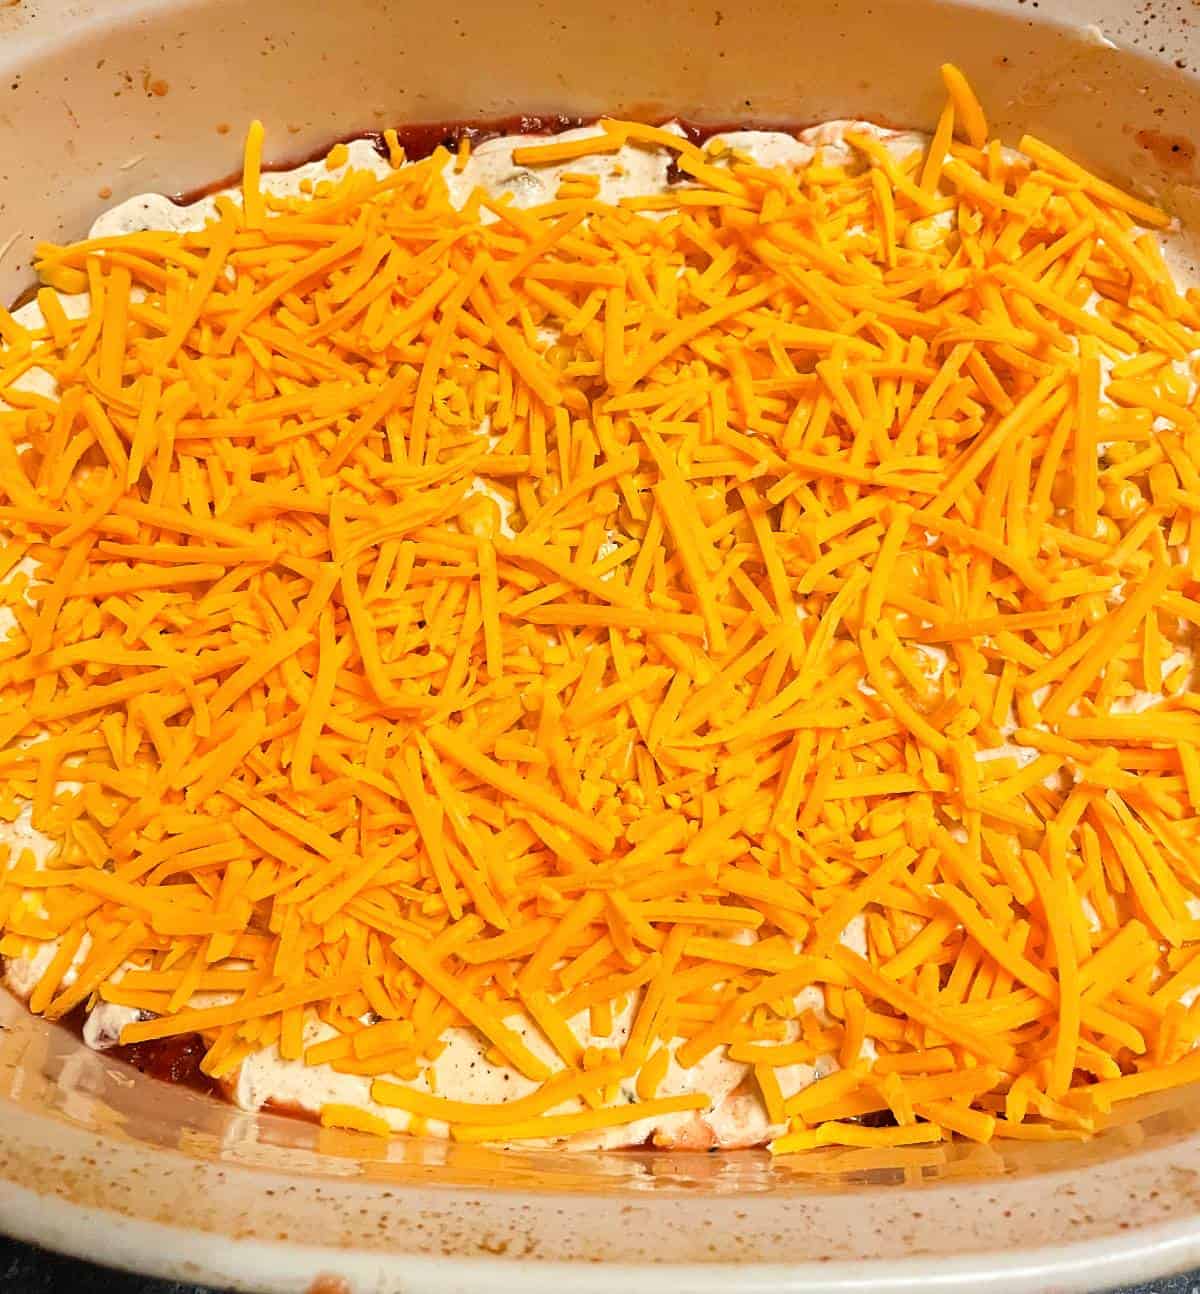 shredded cheddar cheese covering the other ingredients for baked fiesta dip. 